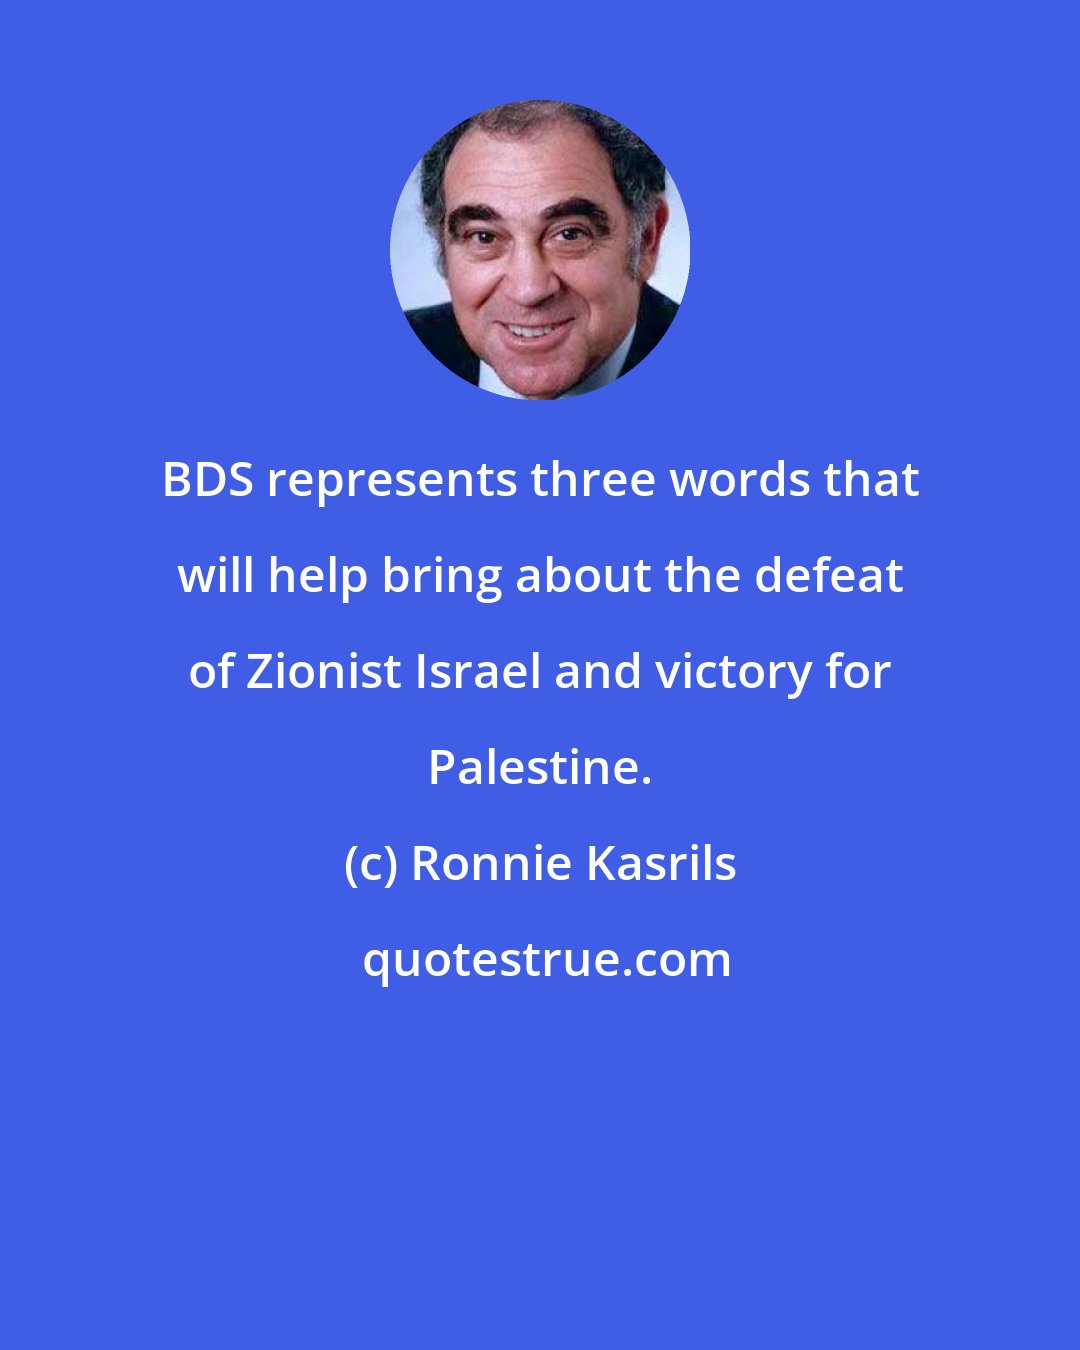 Ronnie Kasrils: BDS represents three words that will help bring about the defeat of Zionist Israel and victory for Palestine.